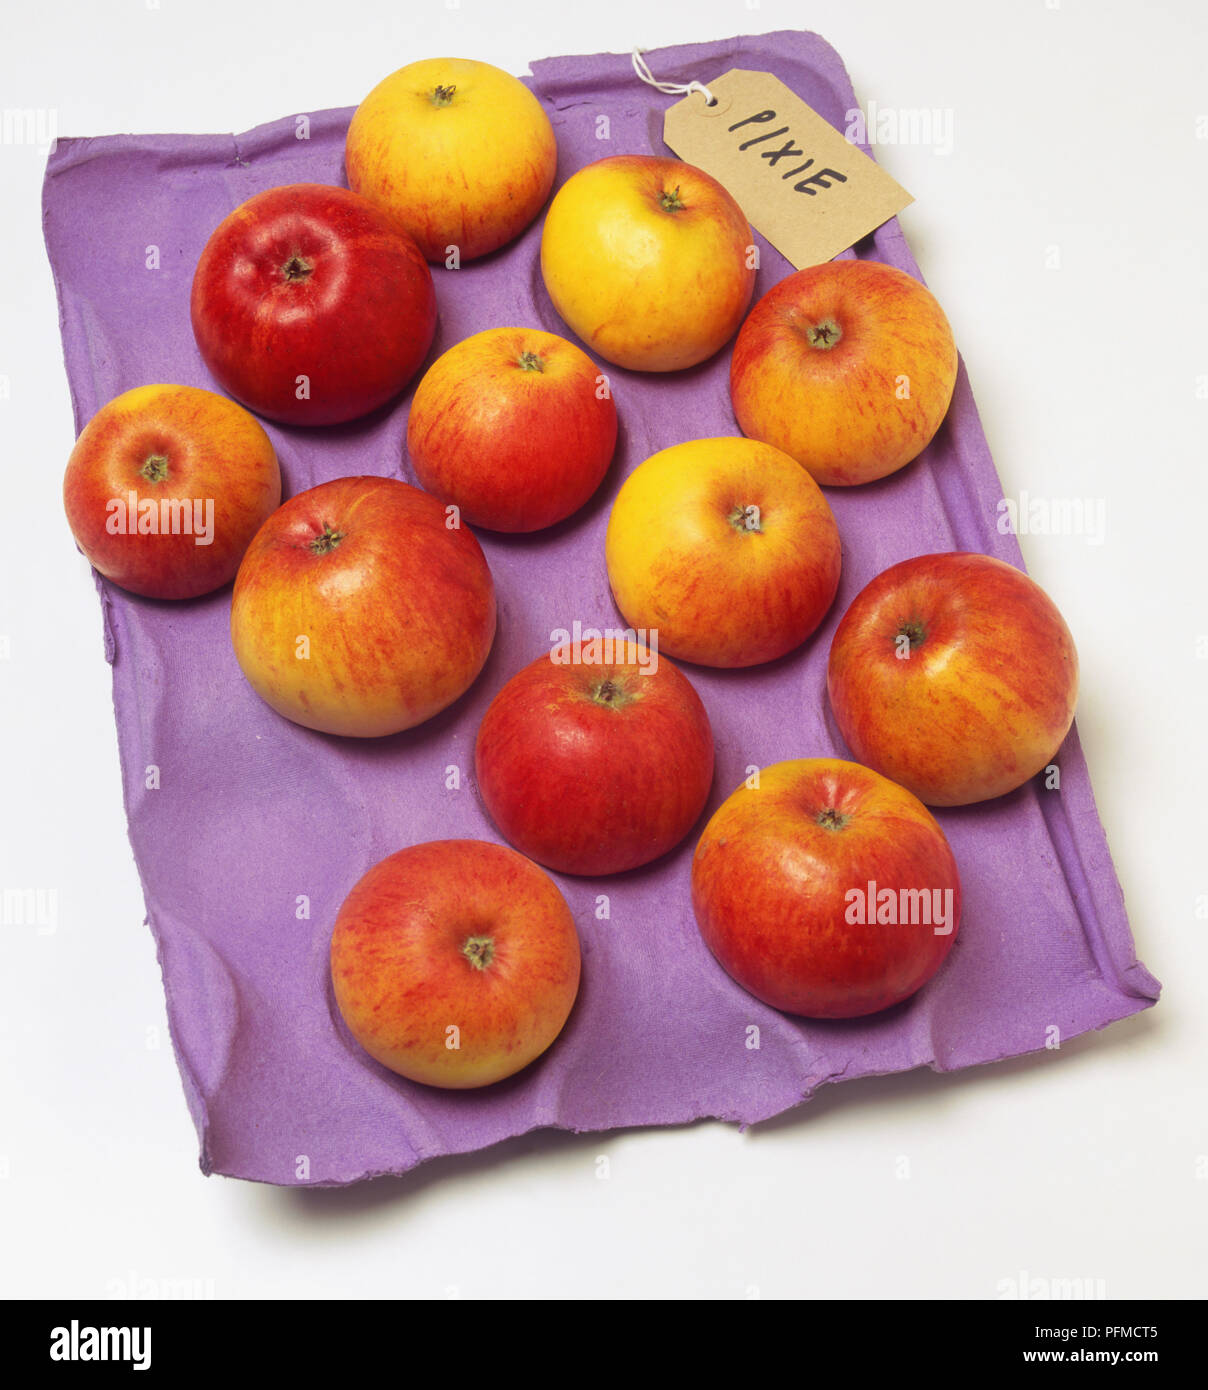 Malus sp., red Apples arranged on grocer's moulded cardboard tray, view from above. Stock Photo